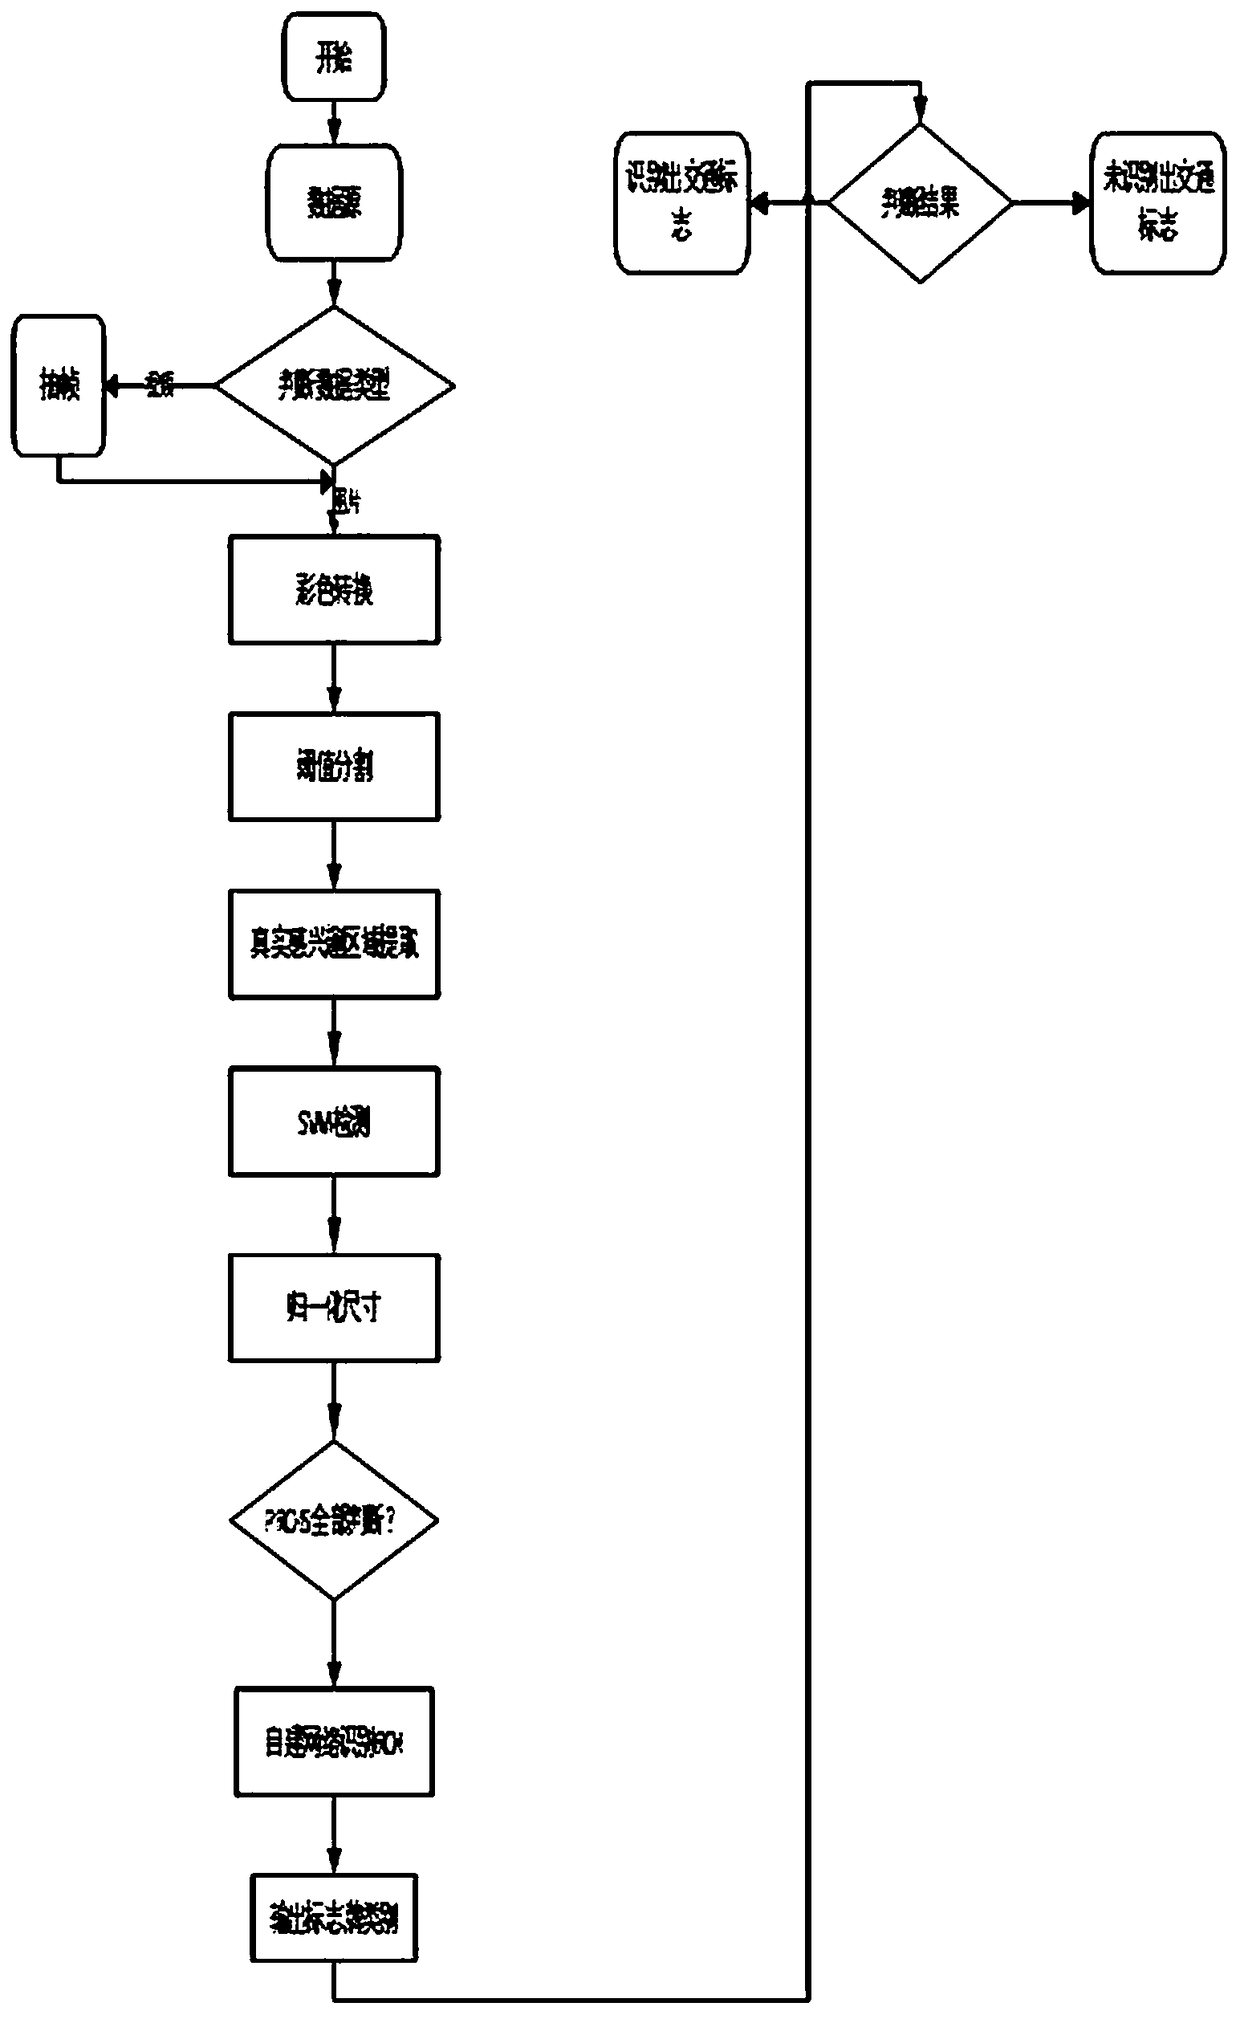 Traffic sign detection and recognition method based on a self-built neural network